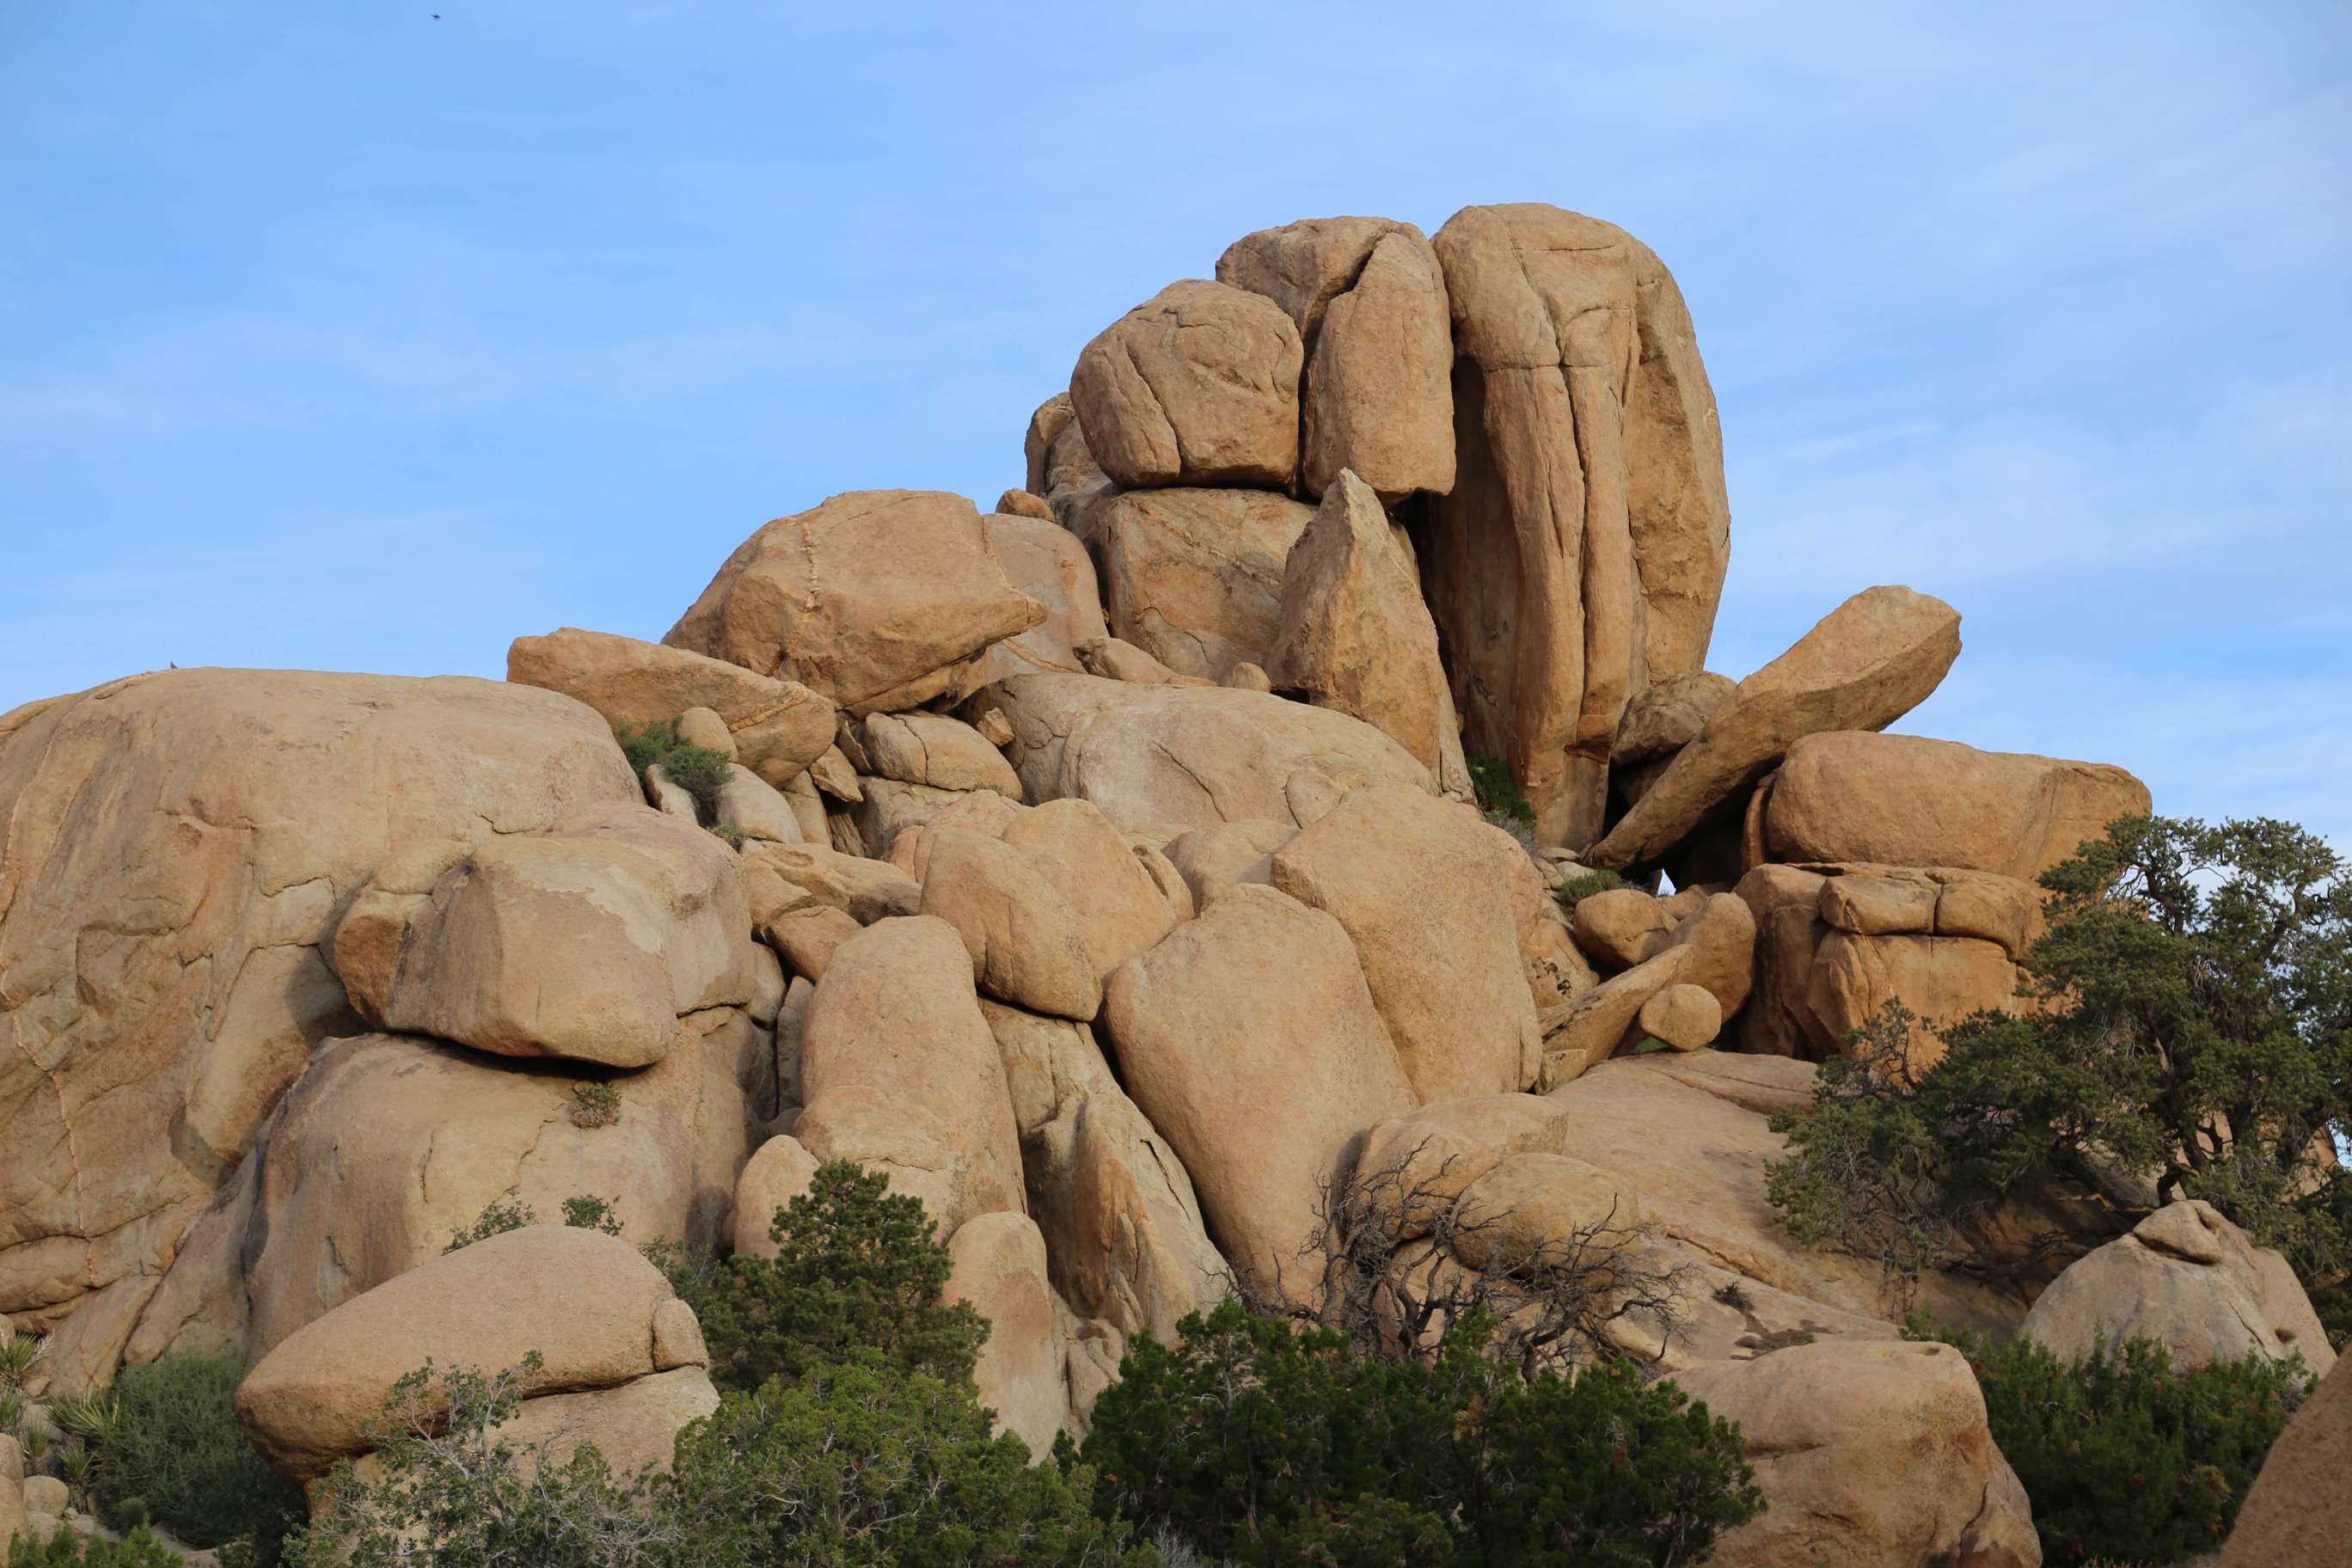 The sandstone boulders have been weathered over the ages.